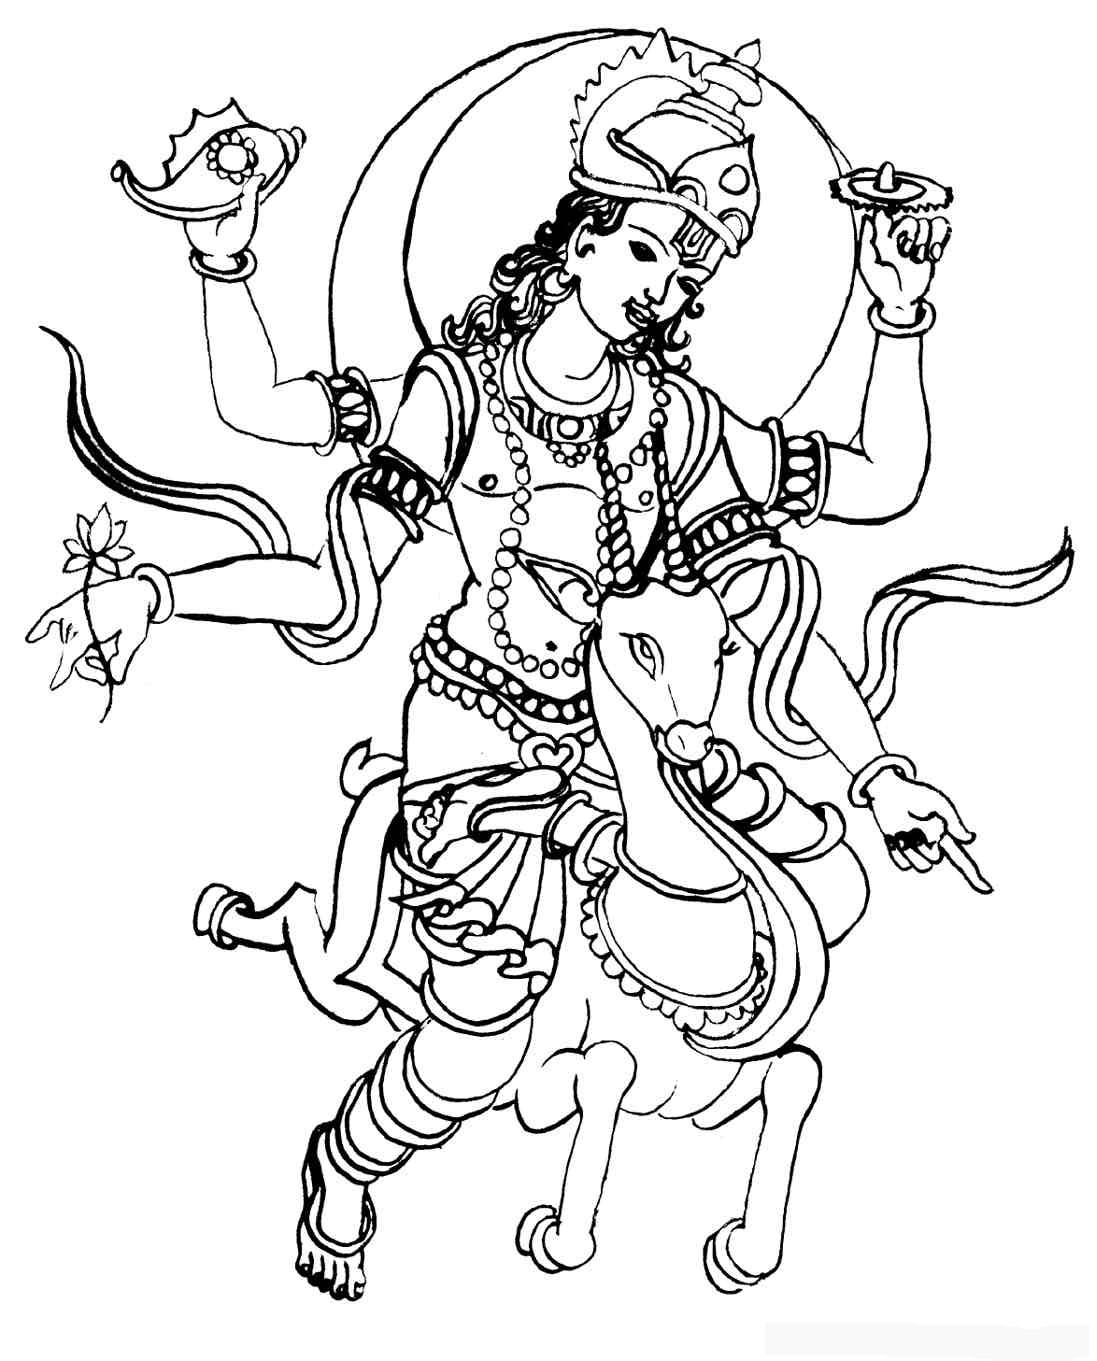 Coloring page: Hindu Mythology (Gods and Goddesses) #109240 - Free Printable Coloring Pages